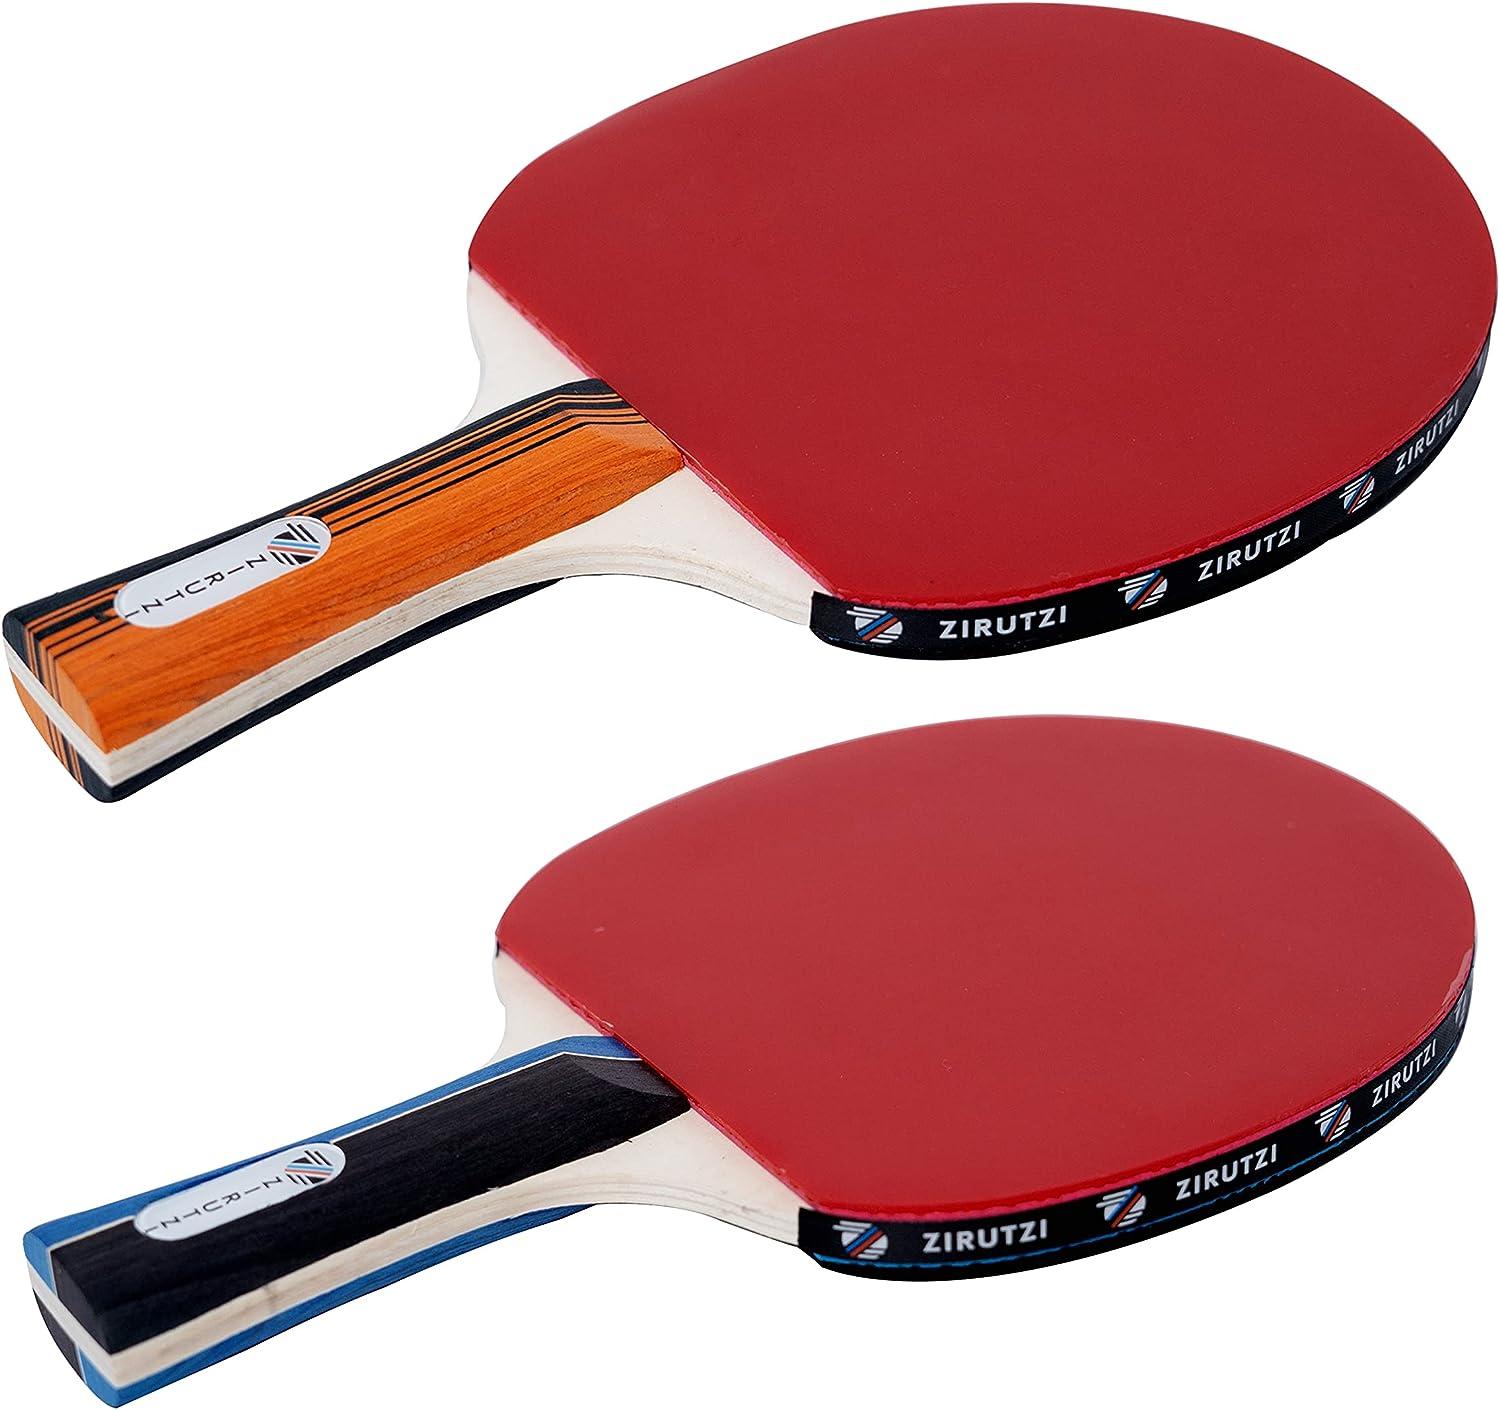 Pro Spin Play Anywhere Portable Ping Pong Net - Retractable Table Tennis Net for Any Table Includes Convenient Storage Bag